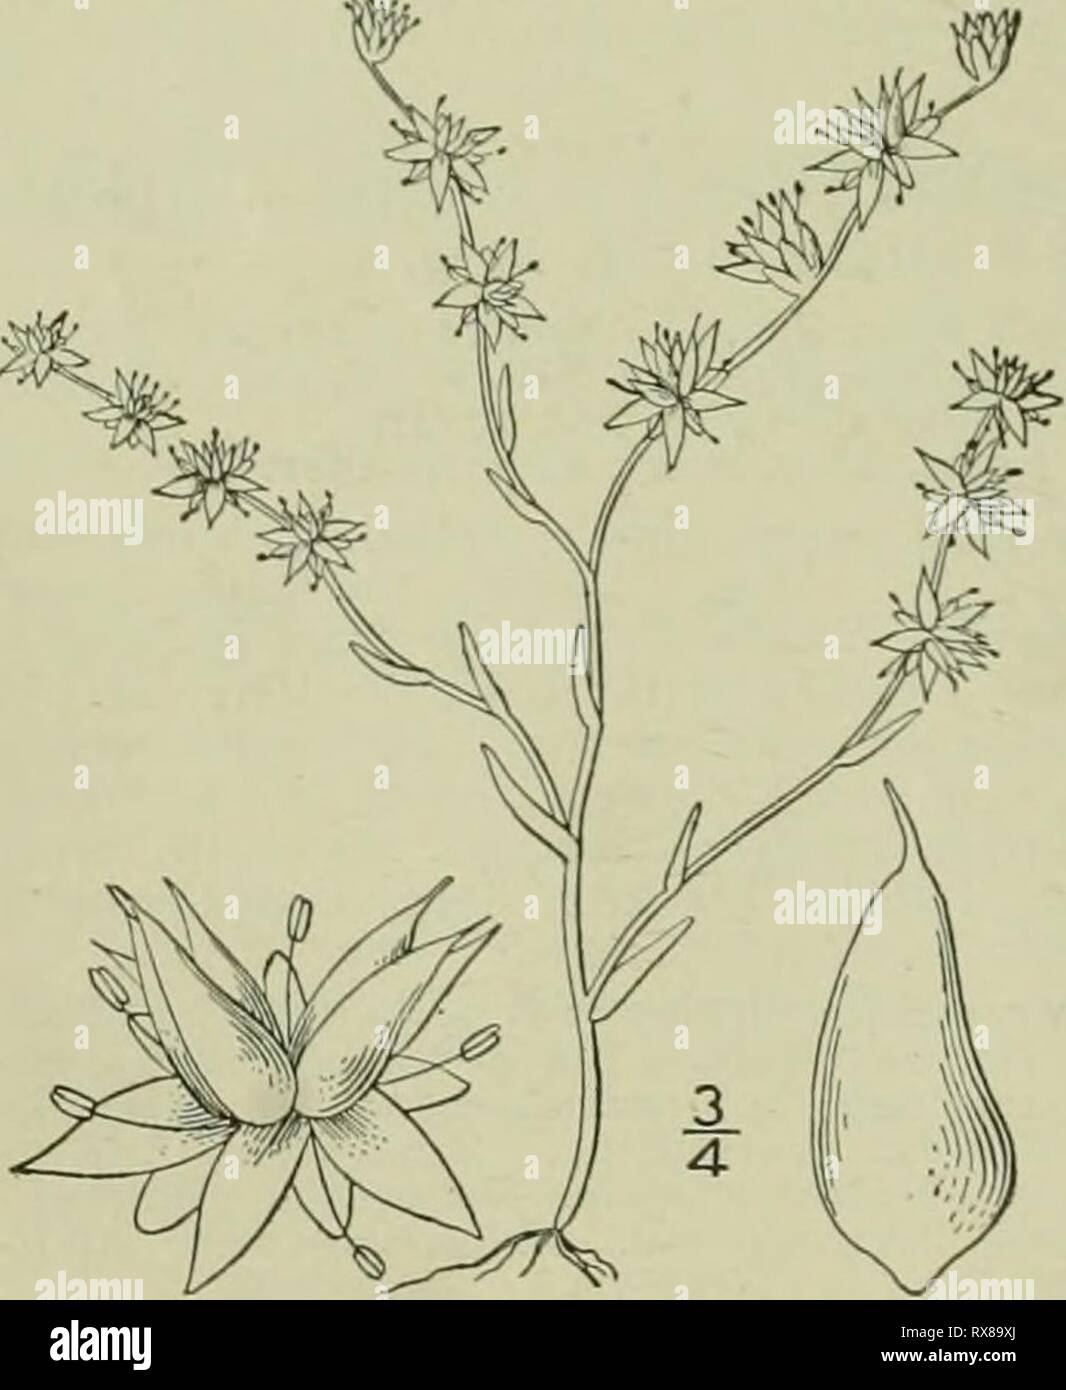 An illustrated flora of the An illustrated flora of the northern United States, Canada and the British possessions : from Newfoundland to the parallel of the southern boundary of Virginia and from the Atlantic Ocean westward to the 102nd meridian ed2illustratedflo02brit Year: 1913  ^=;r^   4. Sedum Nuttallianum Raf. Nuttall's Stonecrop. Fig. 2137. Sedum Nullallia 1832. Sedum Torreyi Don. Card. Diet. 3: 121. 1834. Sedum sfarsiftorum Nutt.; T. &; G. Fl. N. A. i: 559. 1840. Annual, low, tufted, glabrous,  2-3' high. Leaves alternate, scattered, linear-oblong, teretish, sessile, entire, 2'-6' long Stock Photo